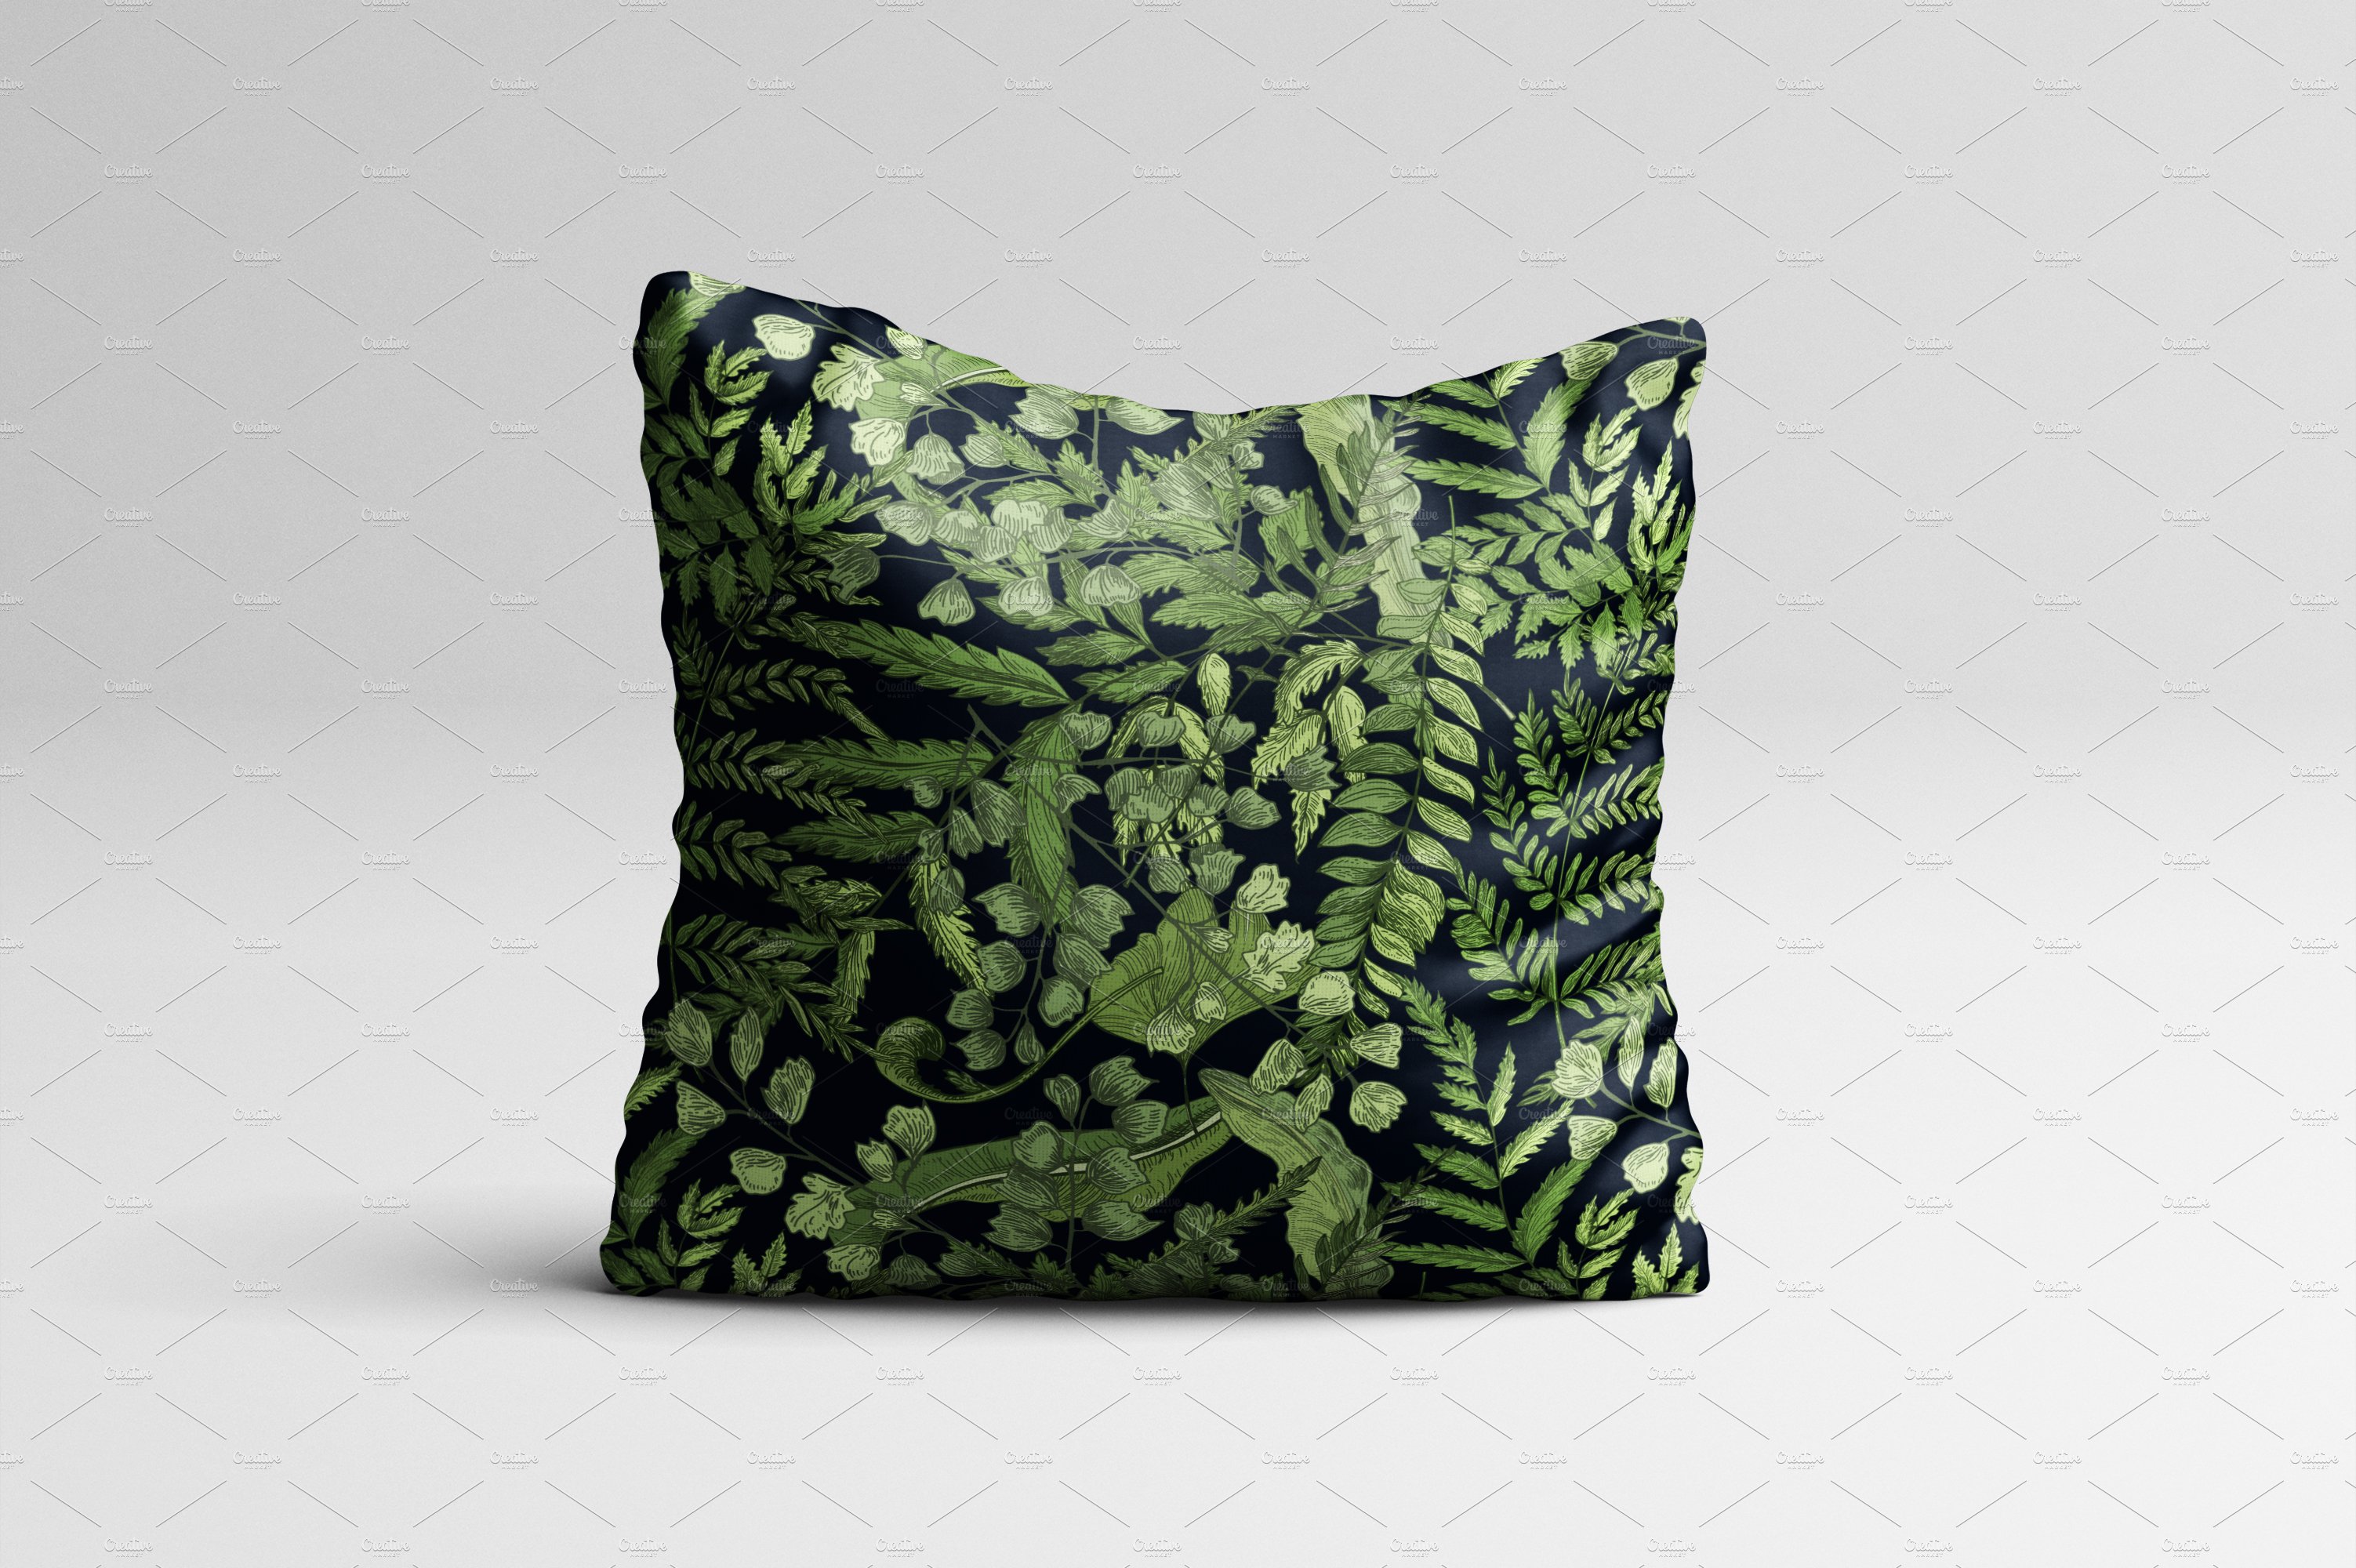 Green and black pillow on a white background.